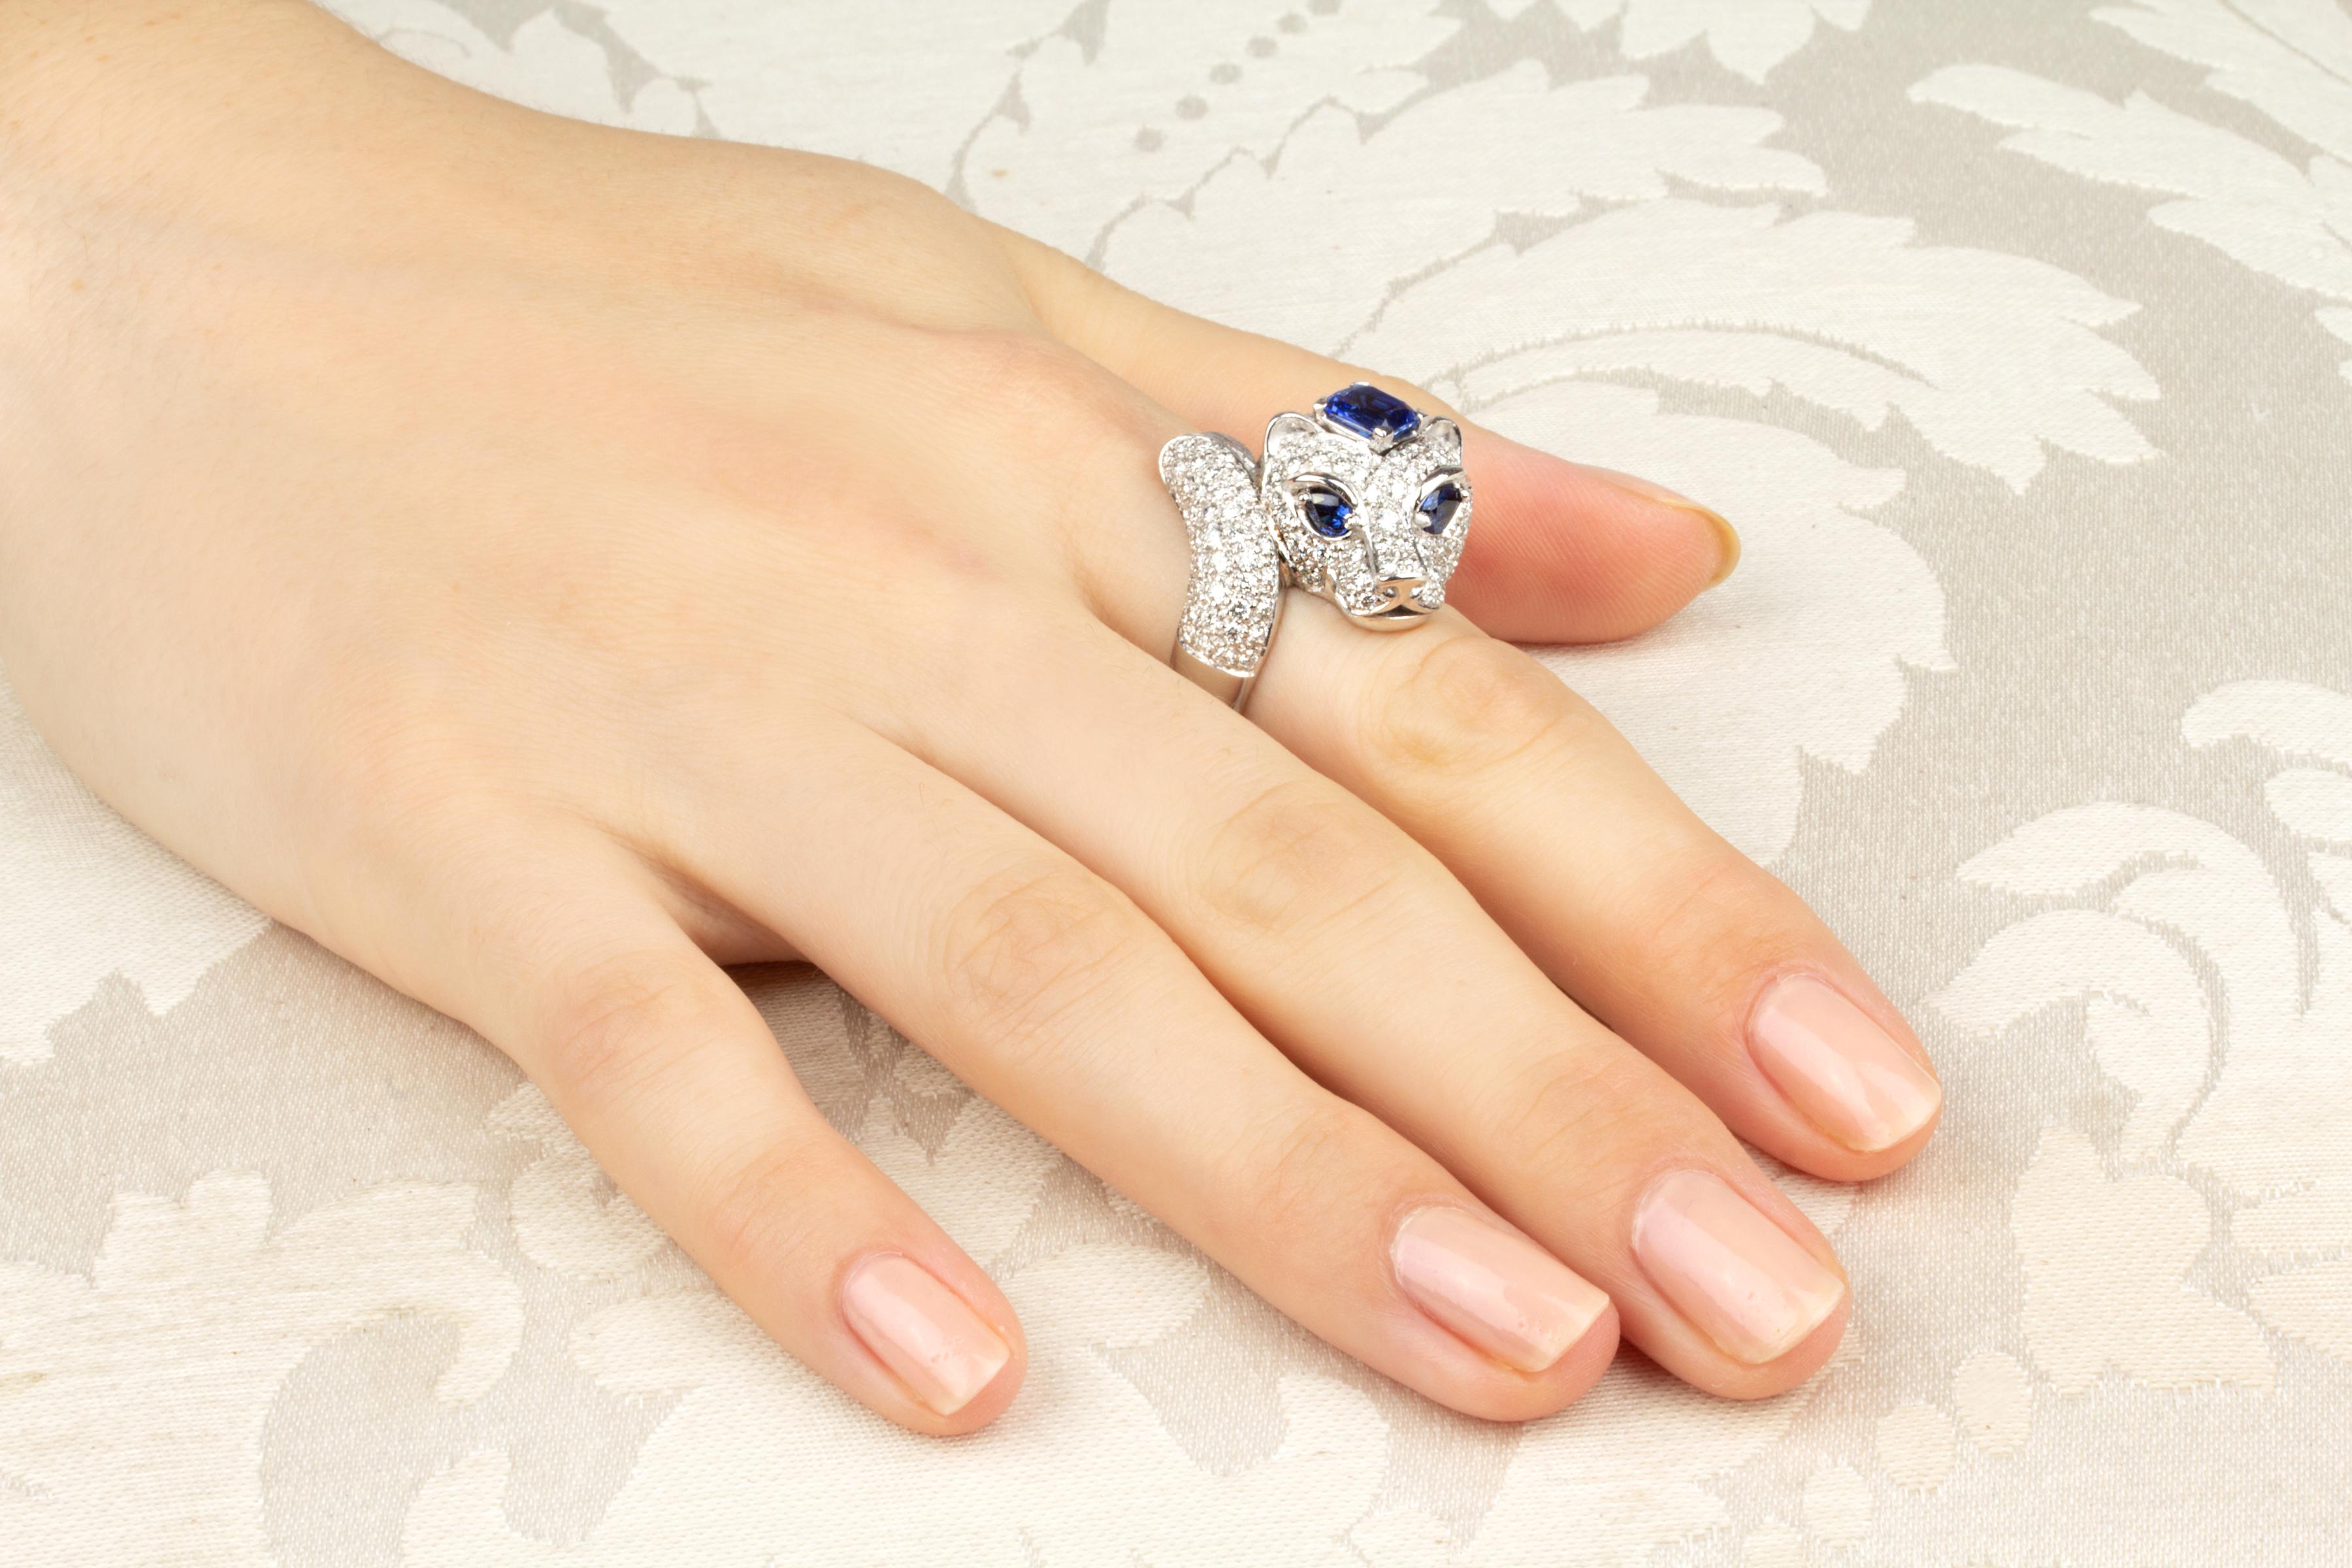 This tiger ring carries 1.70 carats of blue Ceylon sapphire of brilliant quality (tiger crown and 2 eyes). The design is complete with 1.32 carats of round diamonds of top quality set en pavé (F/VVS) in artful fashion. 
The ring is one-of-a-kind. It